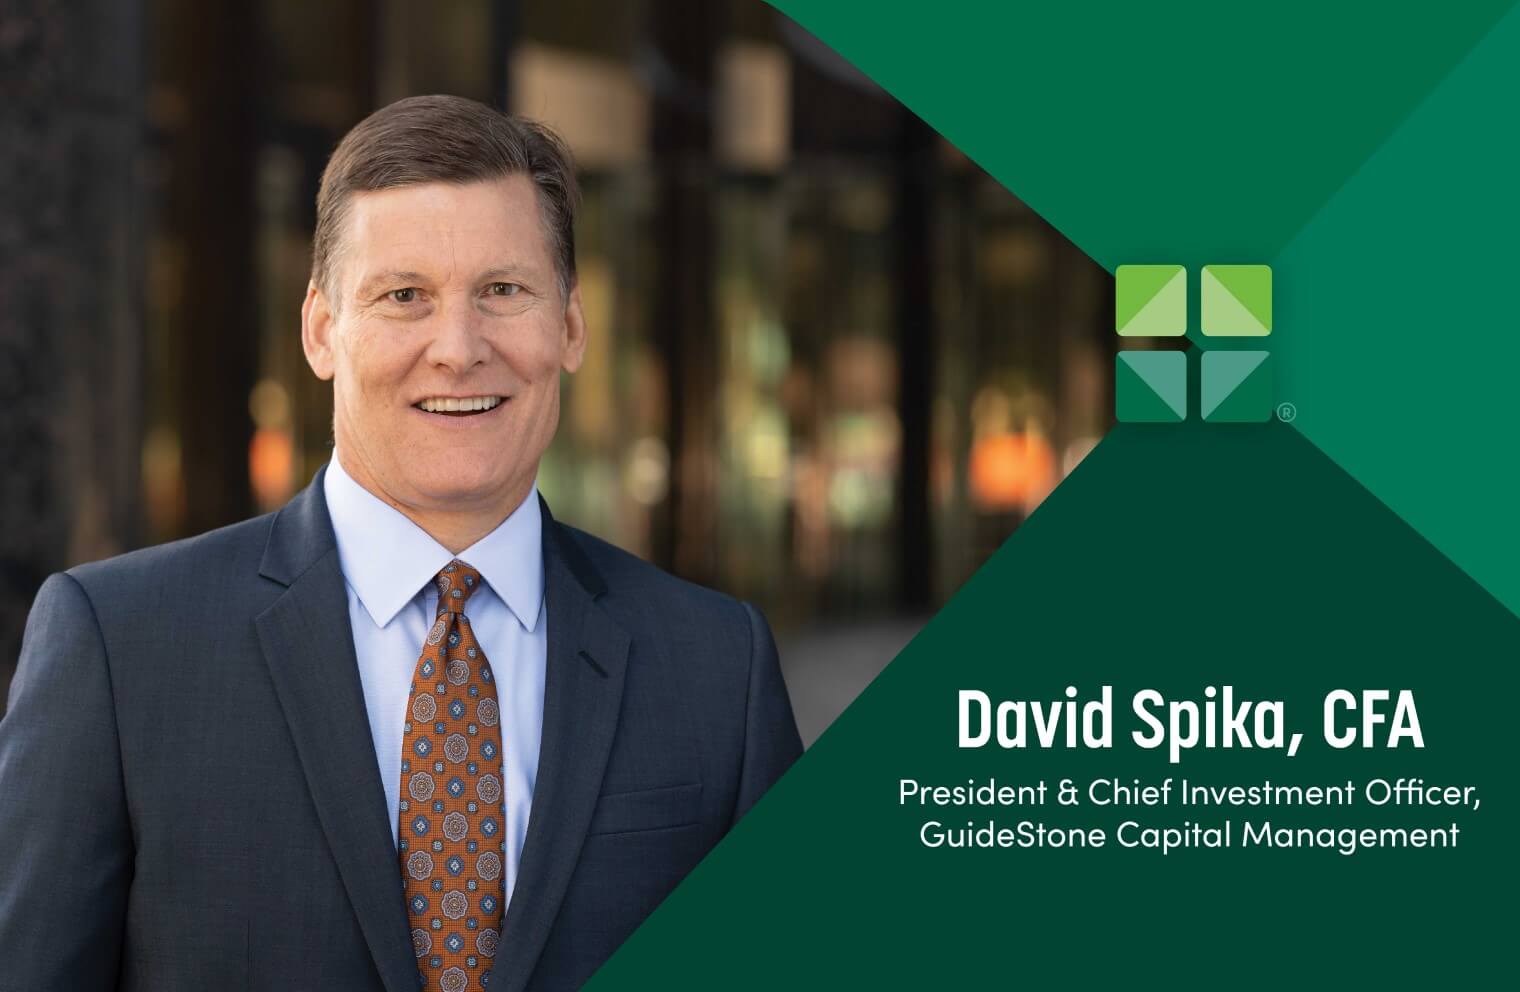 David Spika, CFA. President and Chief Investment Officer, GuideStone Capital Mangement